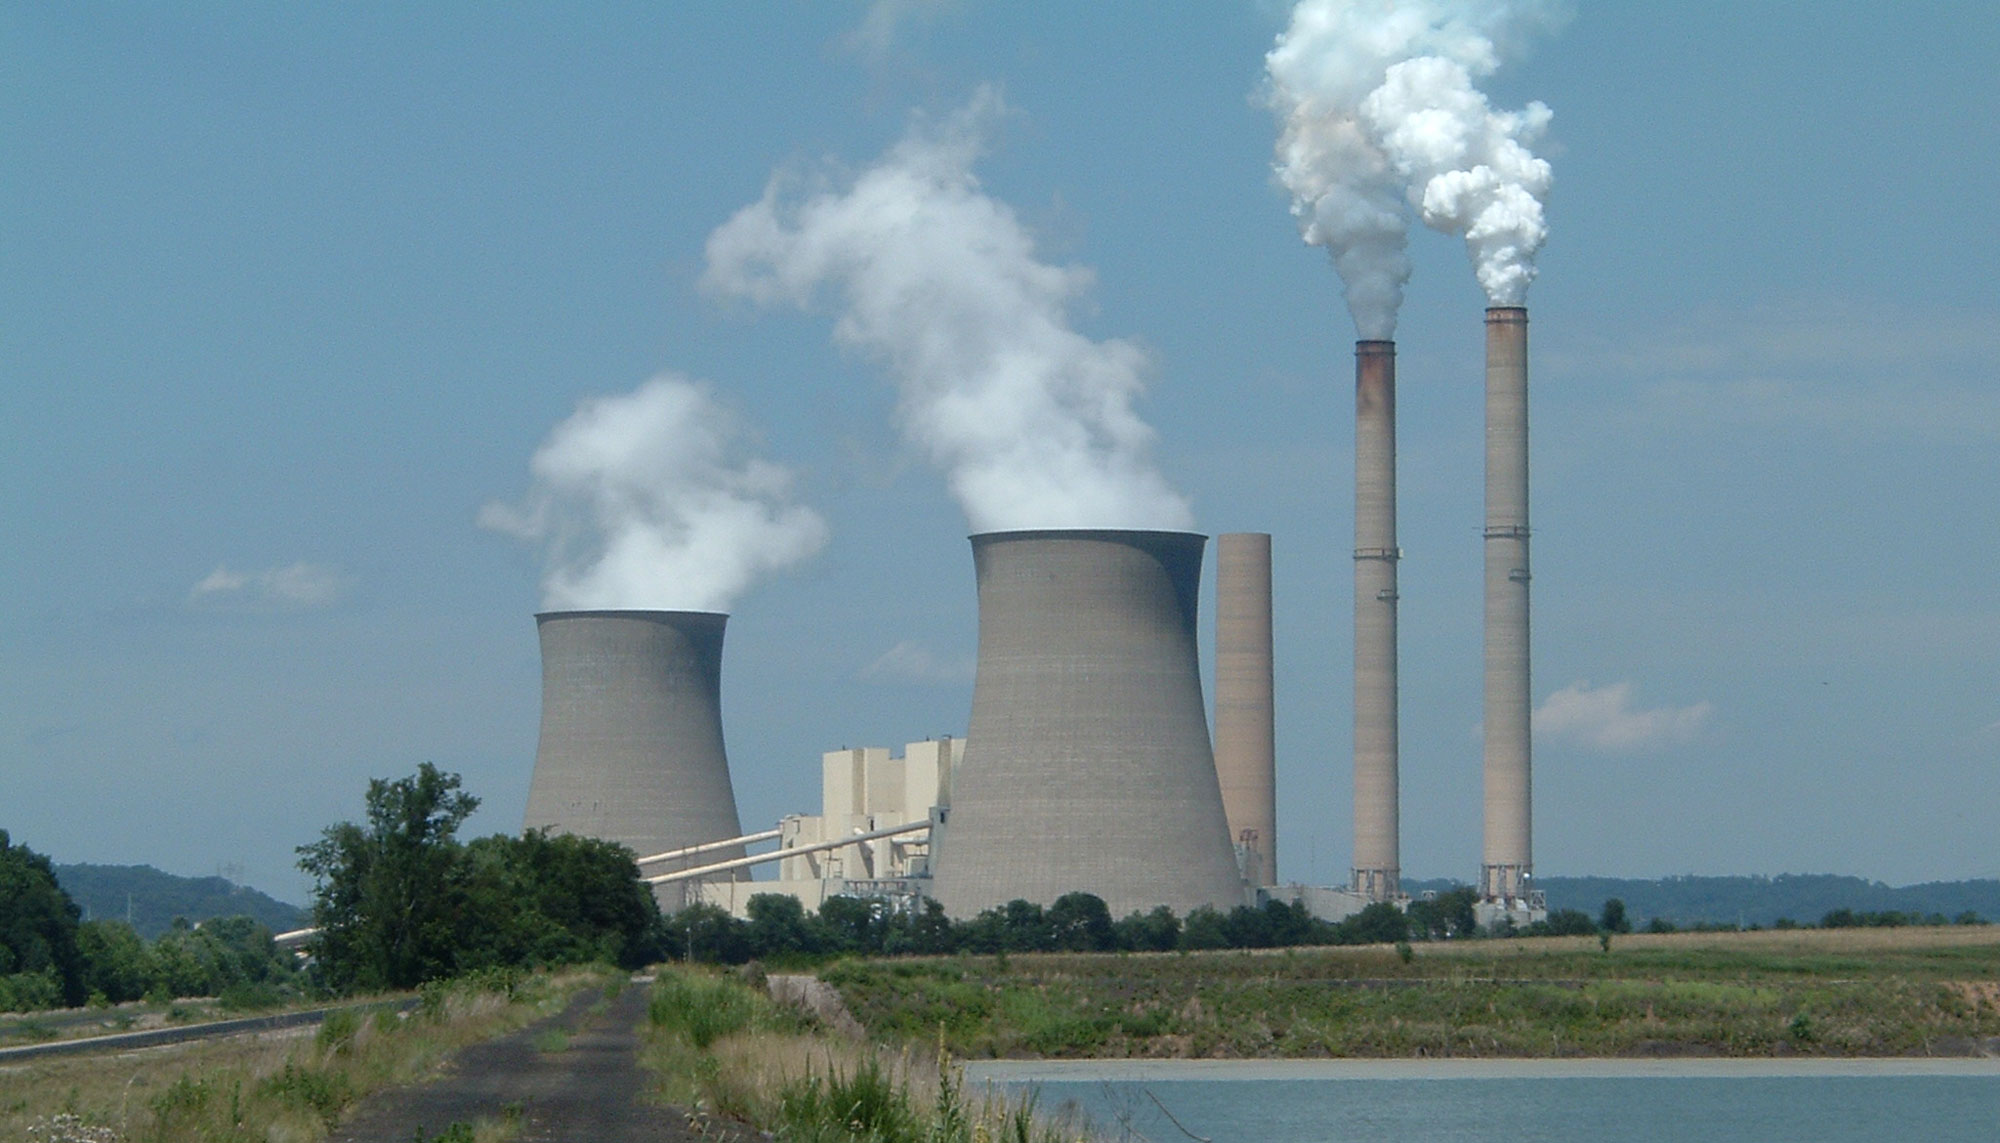 General James M. Gavin Plower Plant in Cheshire, Ohio. The photo shows two large cooling towers and three smokestacks sitting in a flat field. A beige building appears to be situated between the cooling towers. In the foreground, a two-track road runs toward the power plant. To the right of the road is water.